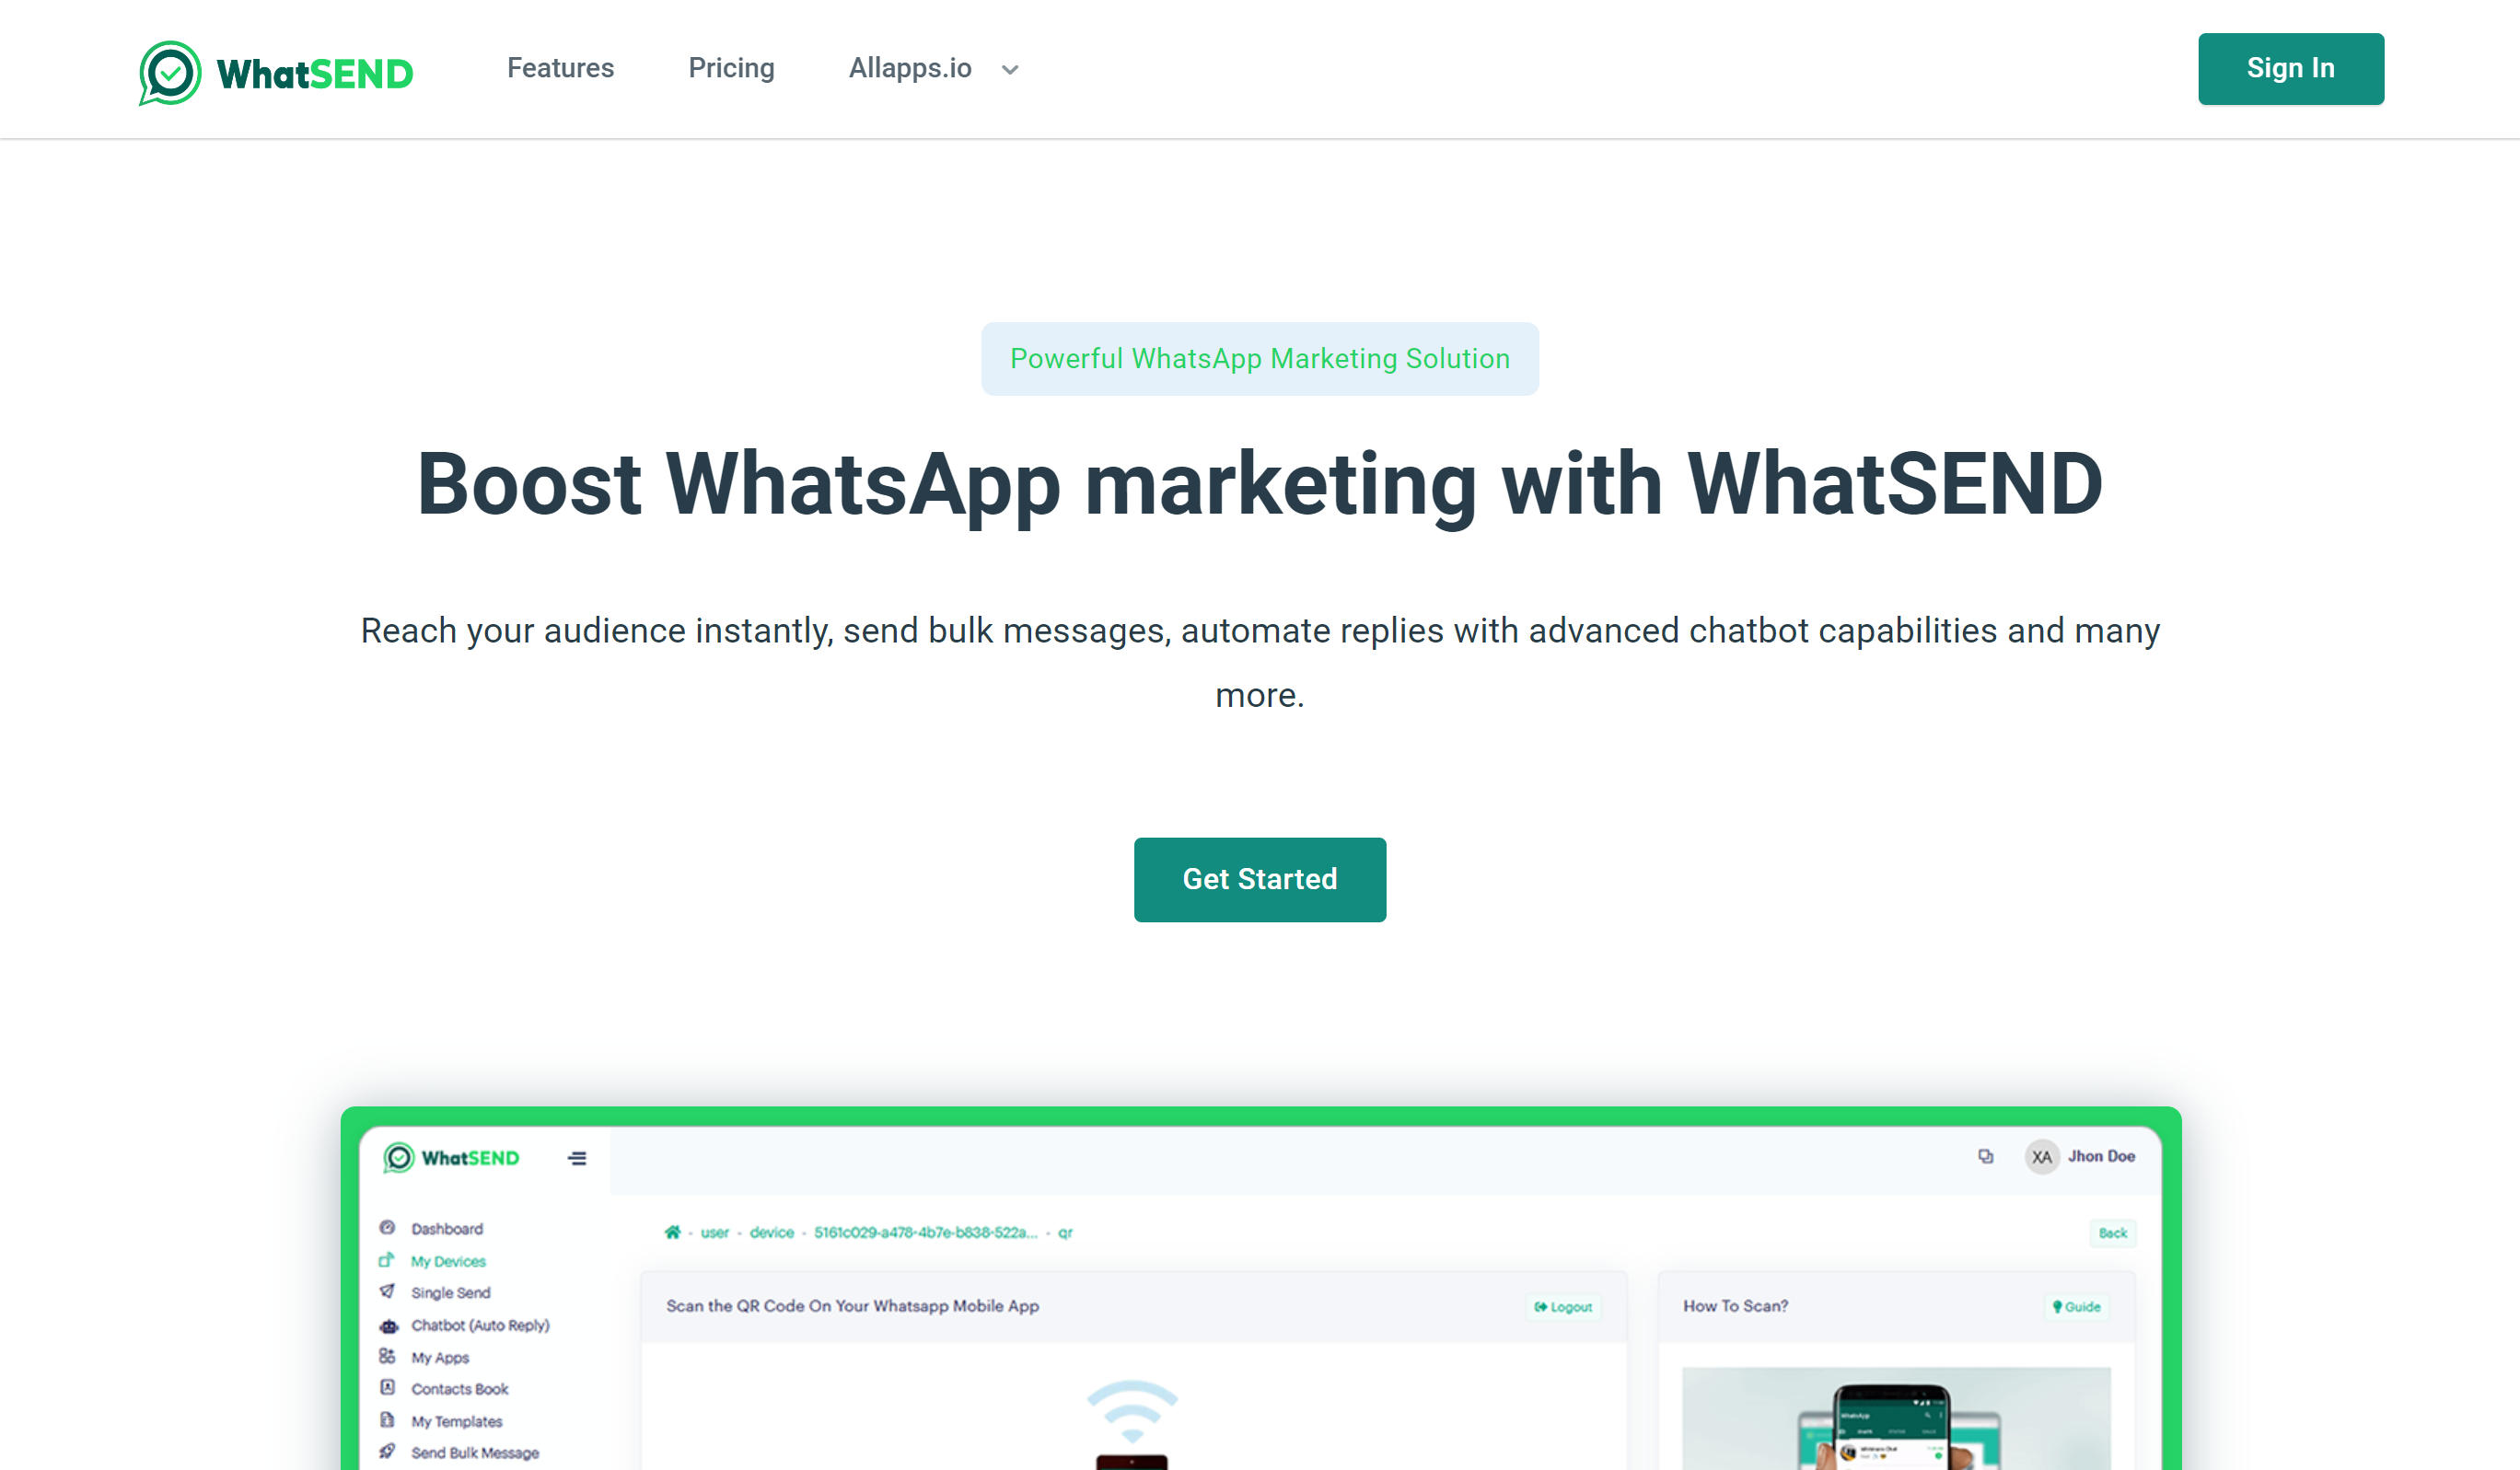 WhatSEND by AllApps.Io Landing page